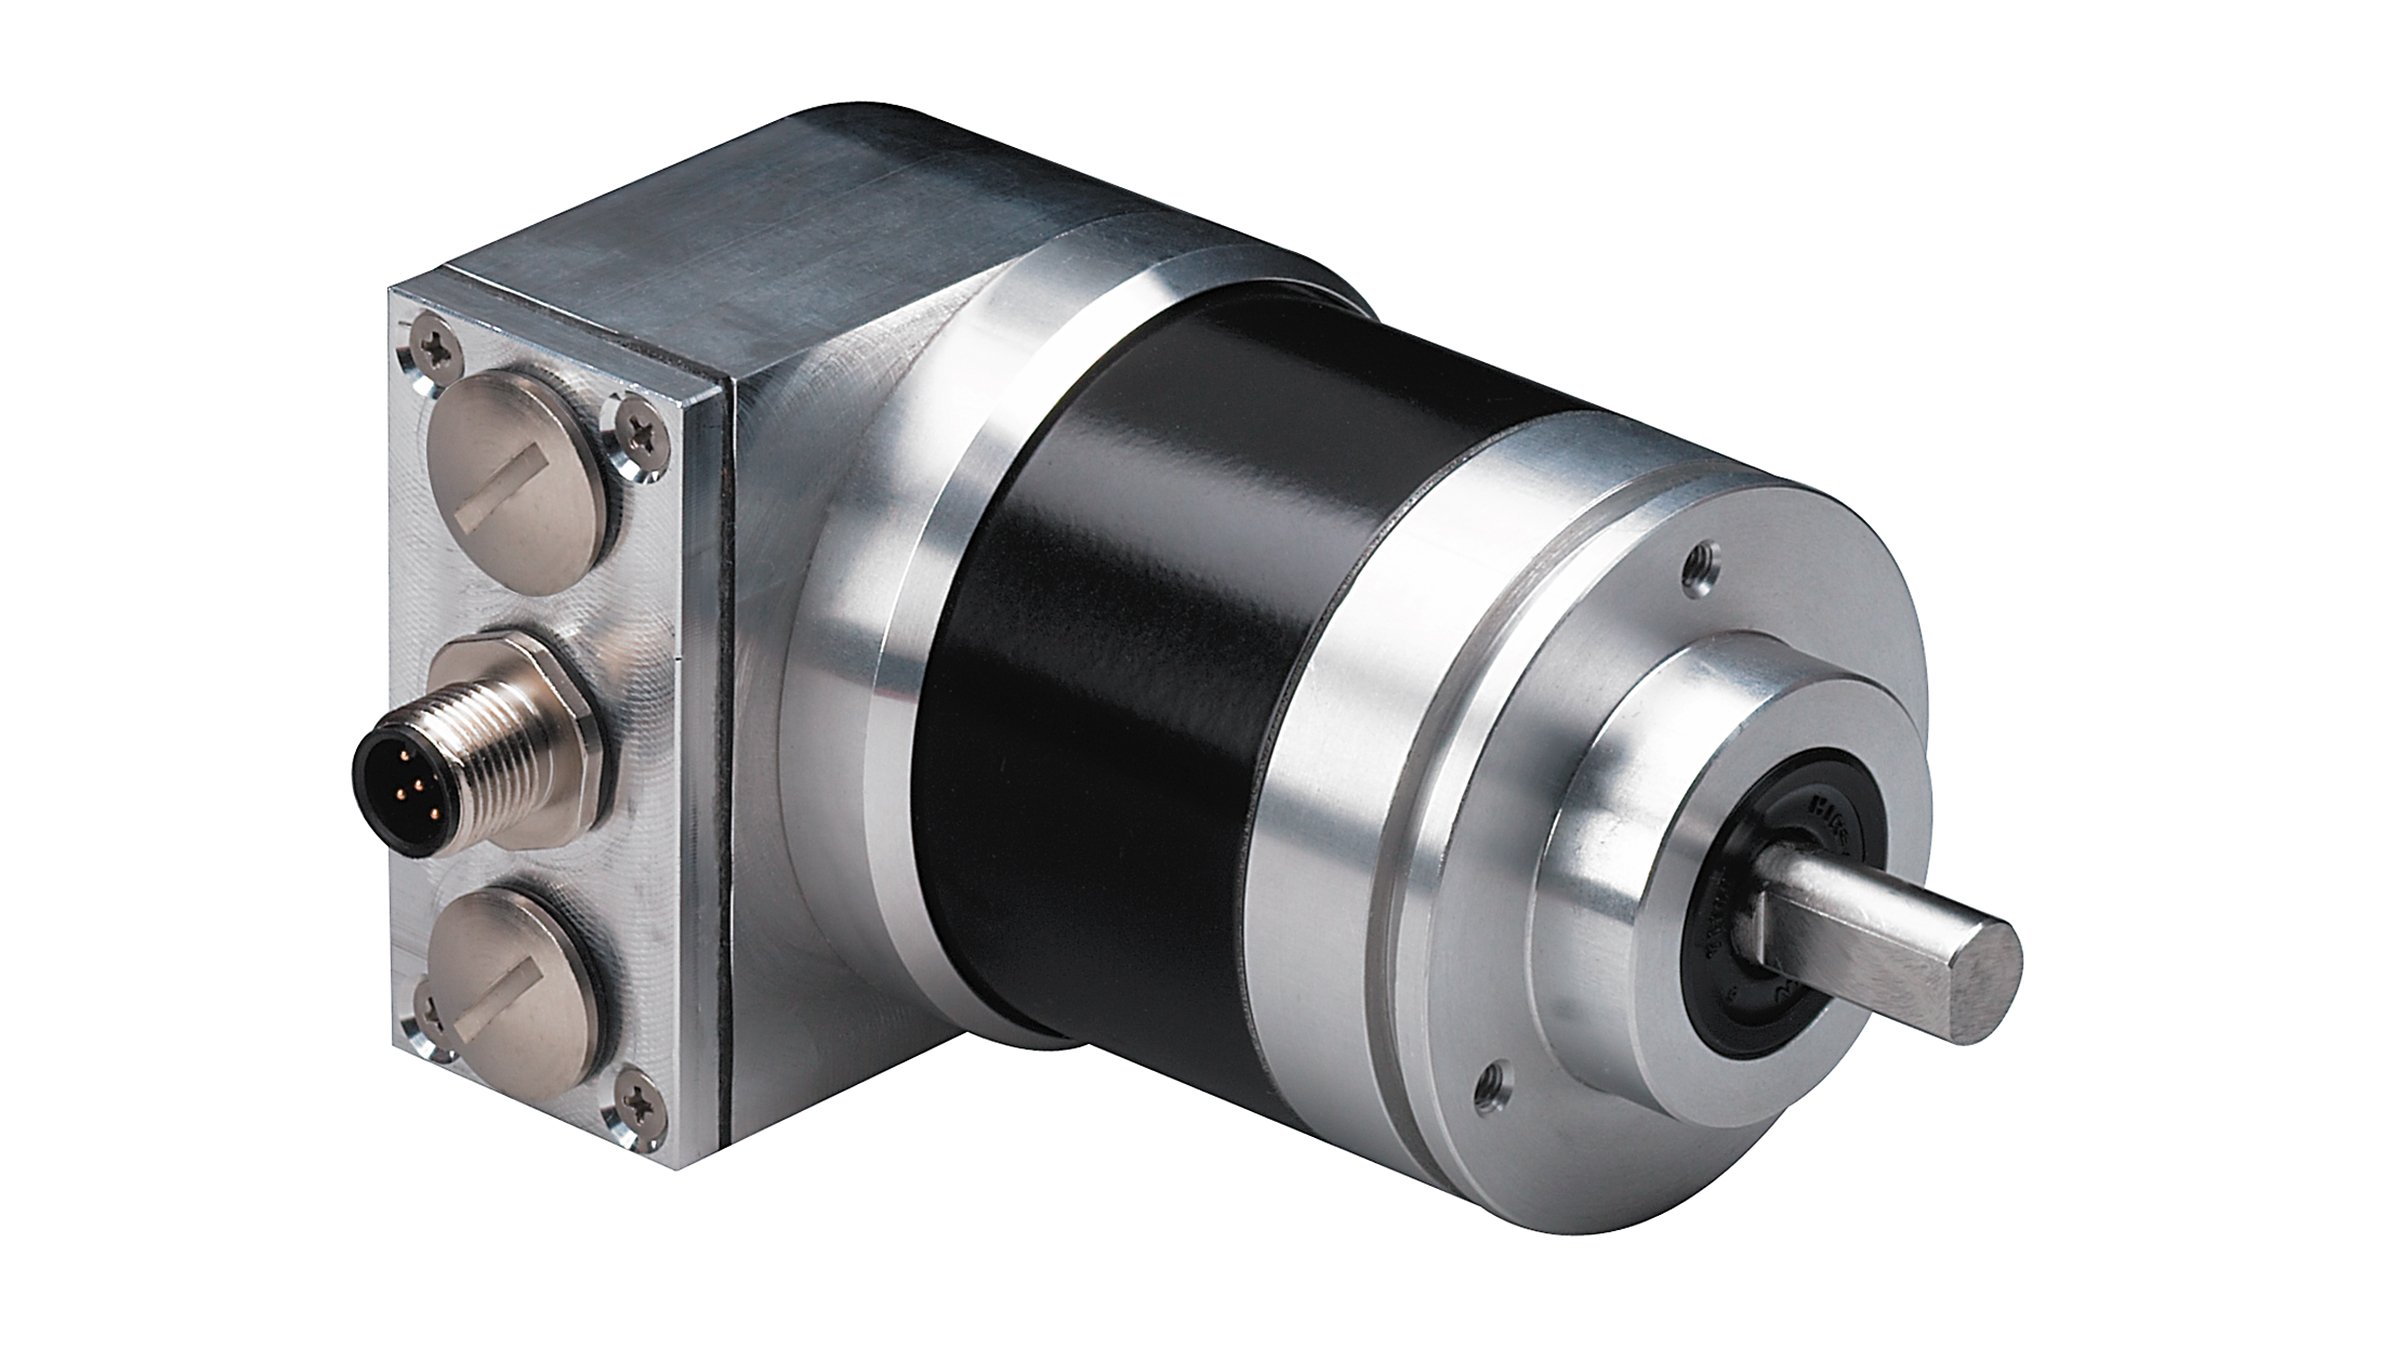 Allen‑Bradley Bulletin 842D DeviceNet™ Multi-turn Magnetic Encoder is a 26-bit absolute multi-turn shaft encoder that is directly connected to DeviceNet.